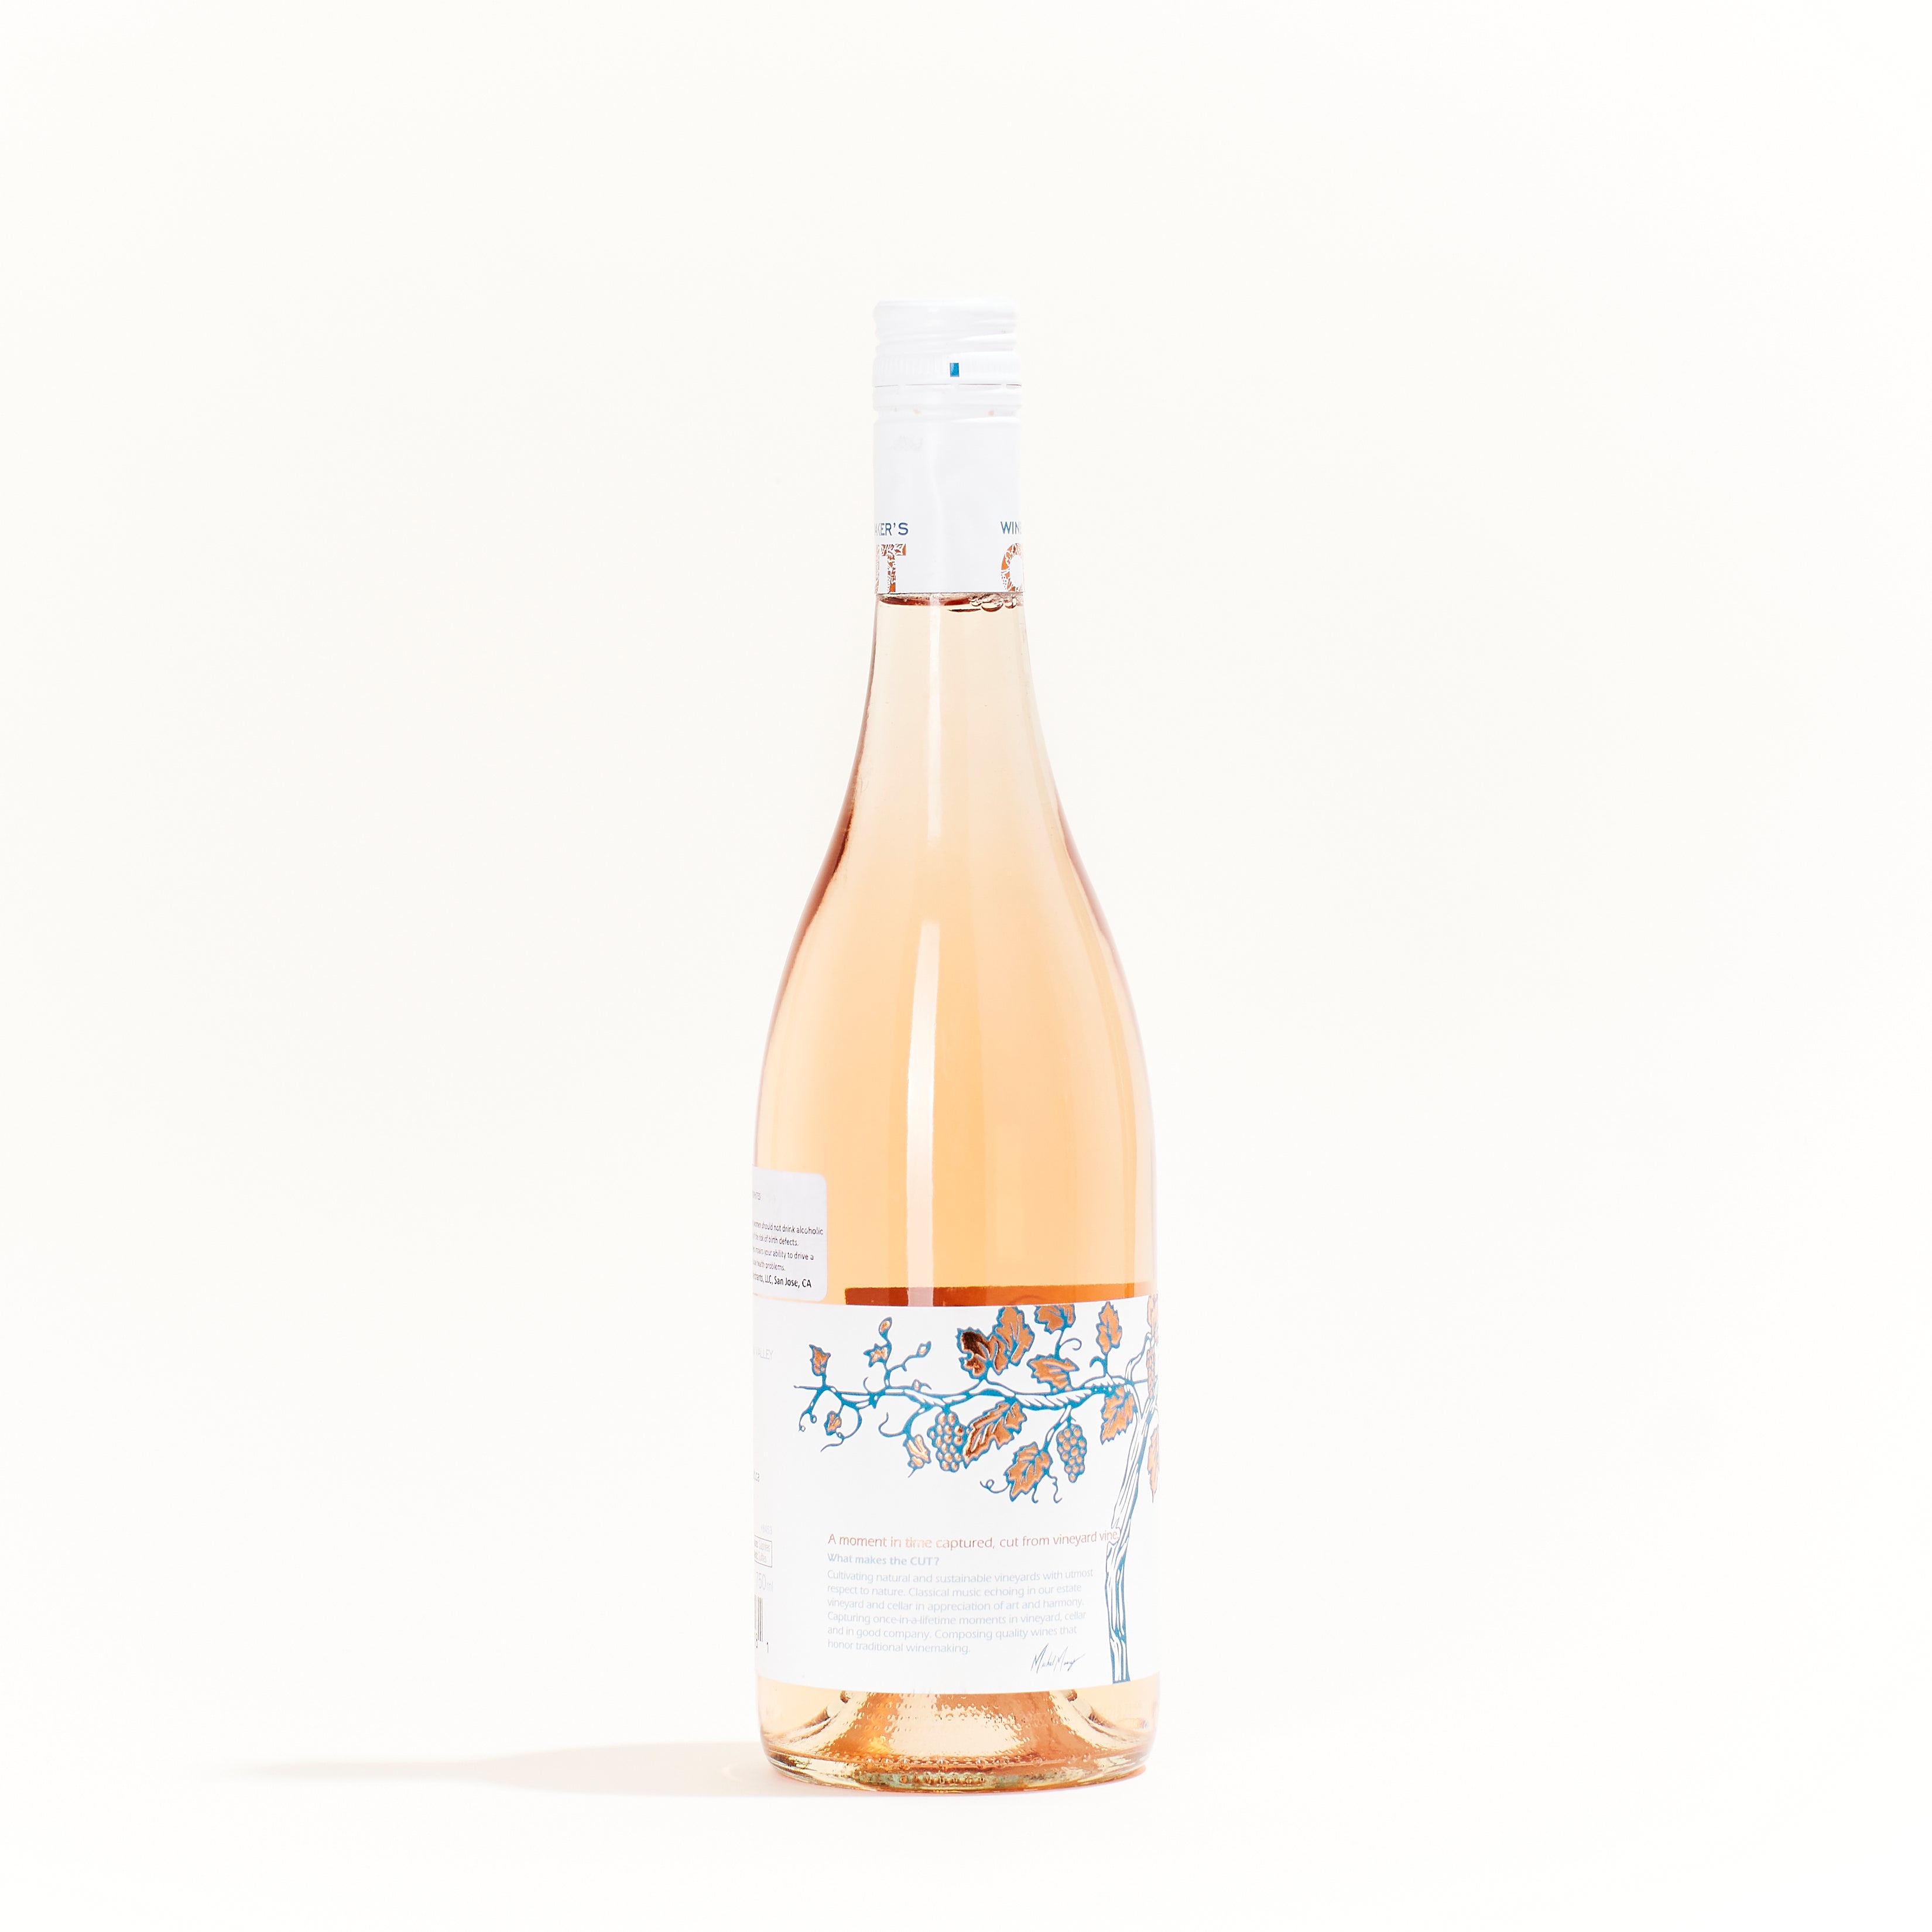 Okanagan Valley Rosé, by Winemaker&#39;s CUT, made from Cabernet Franc is a natural Rosé Wine from Okanagan Valley, Canada.